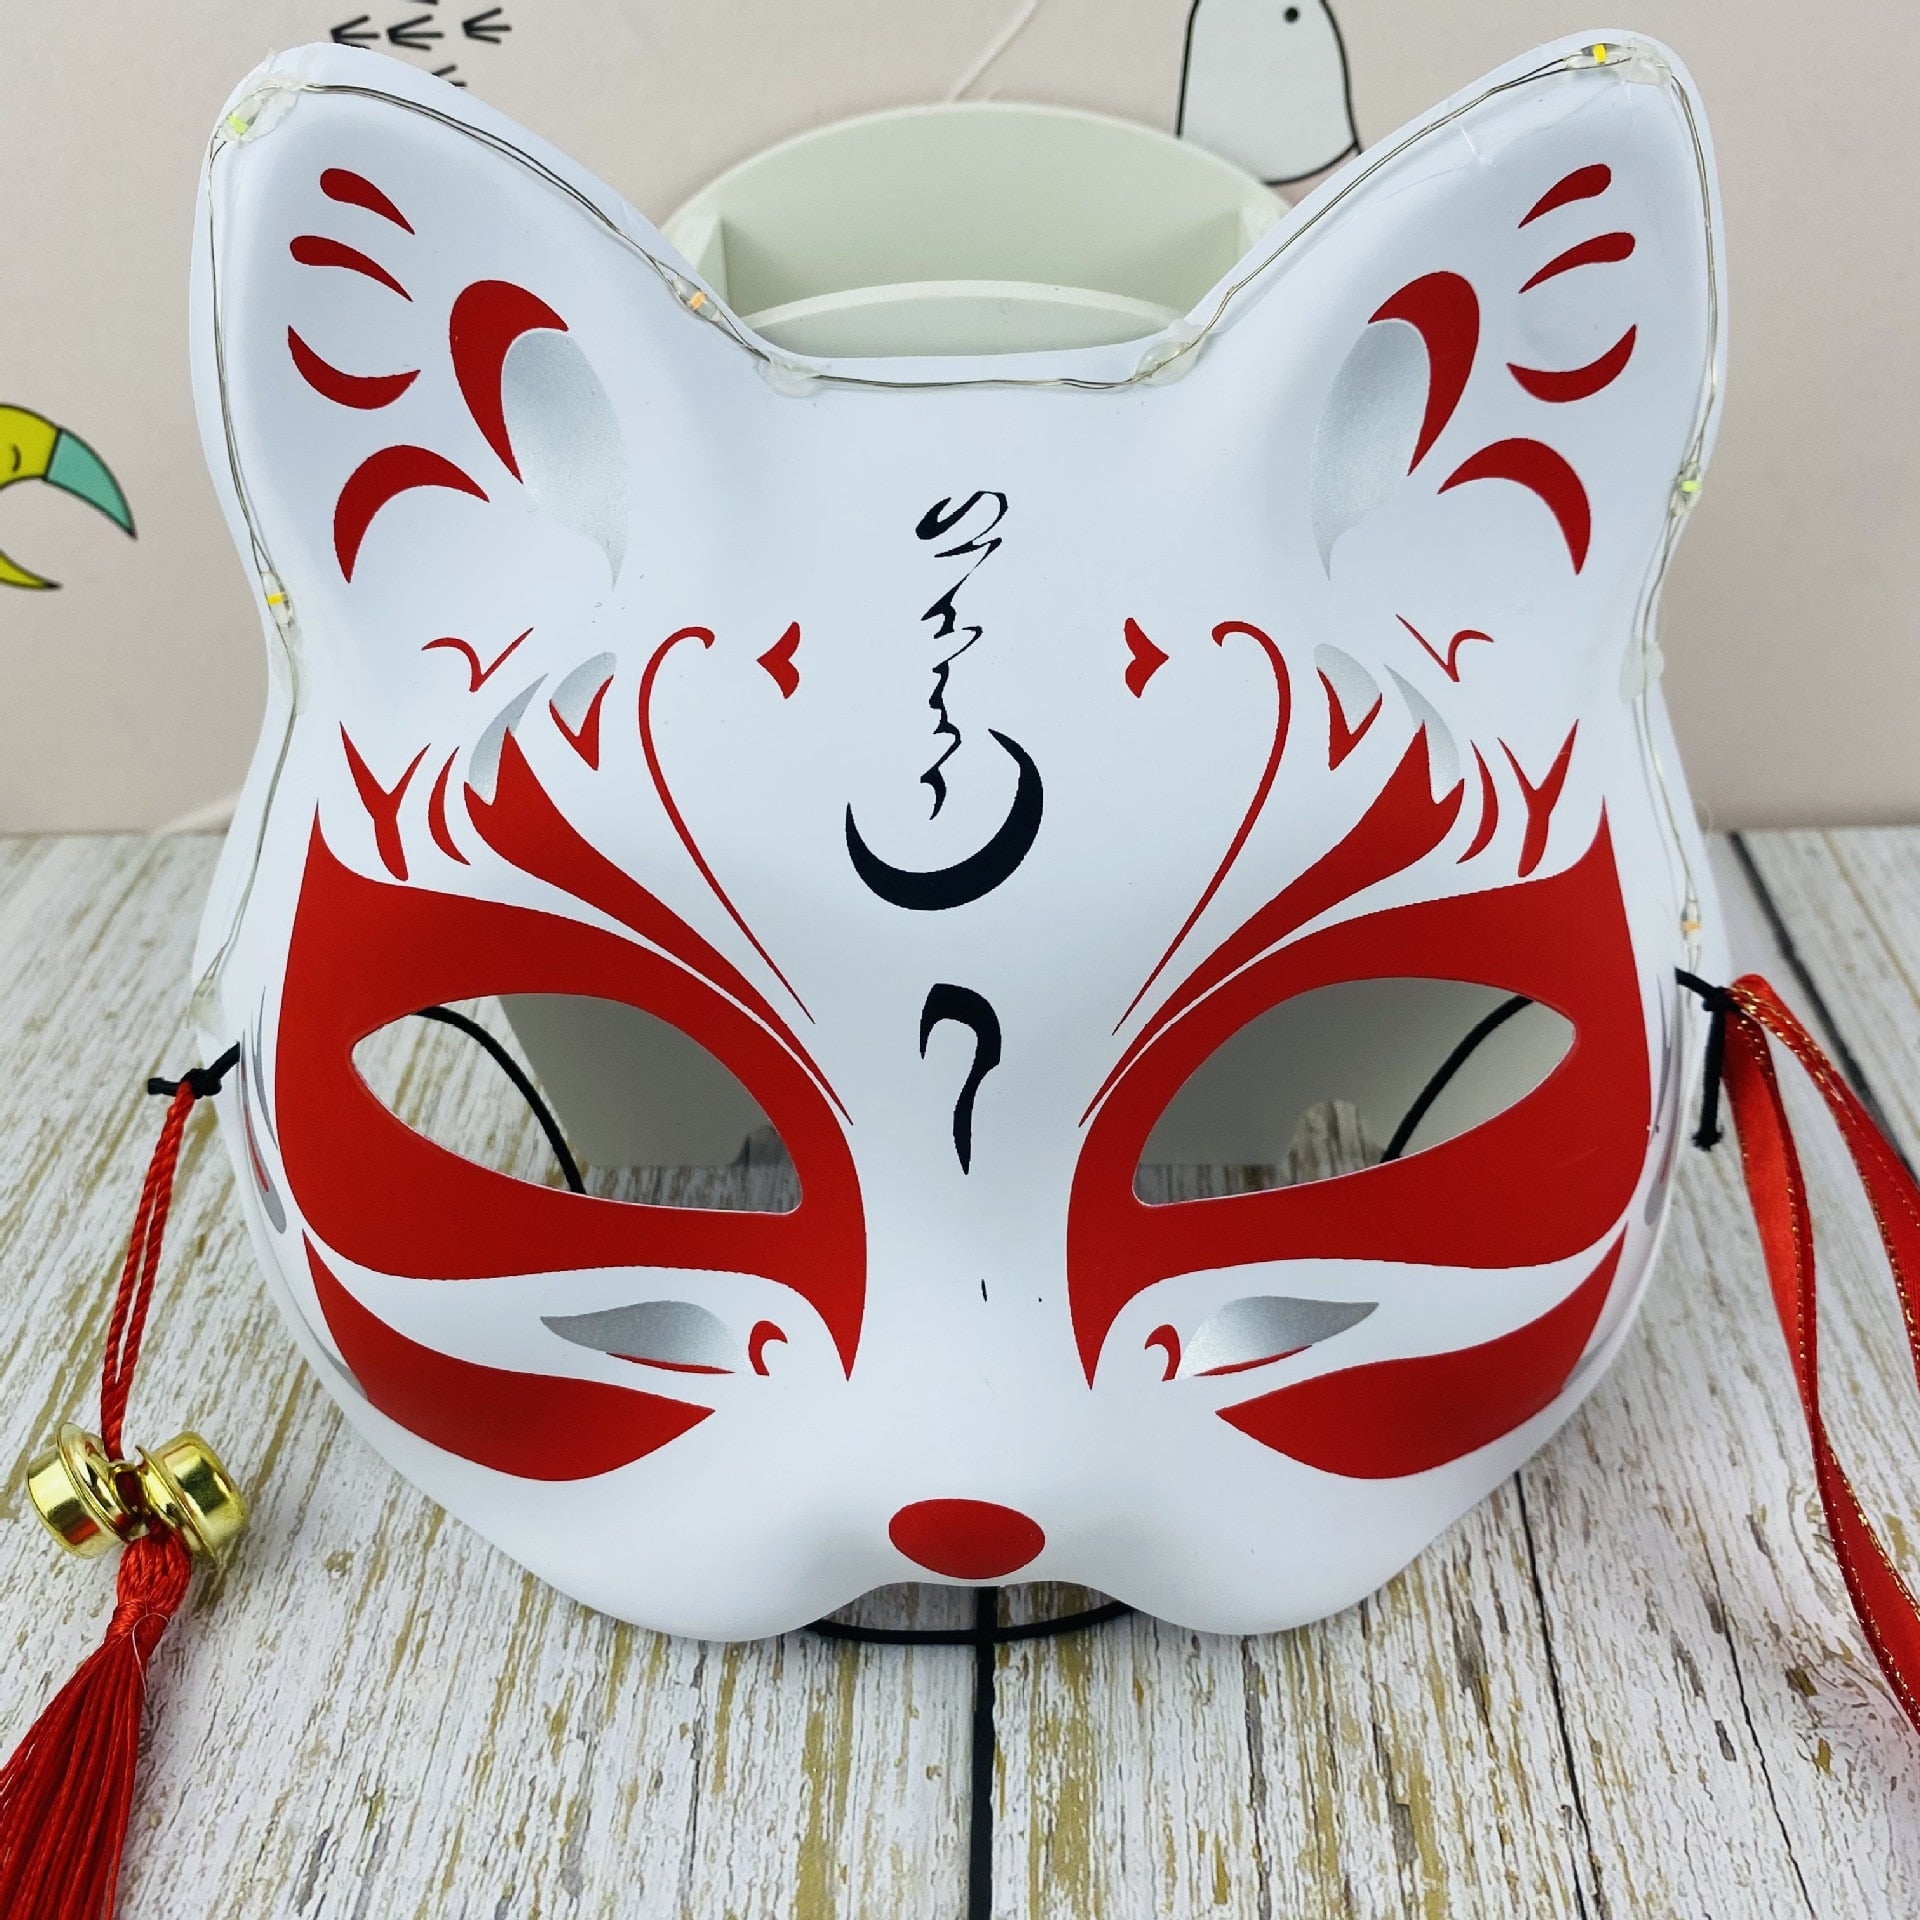 Japanese Mask Half Face Cosplay Prop